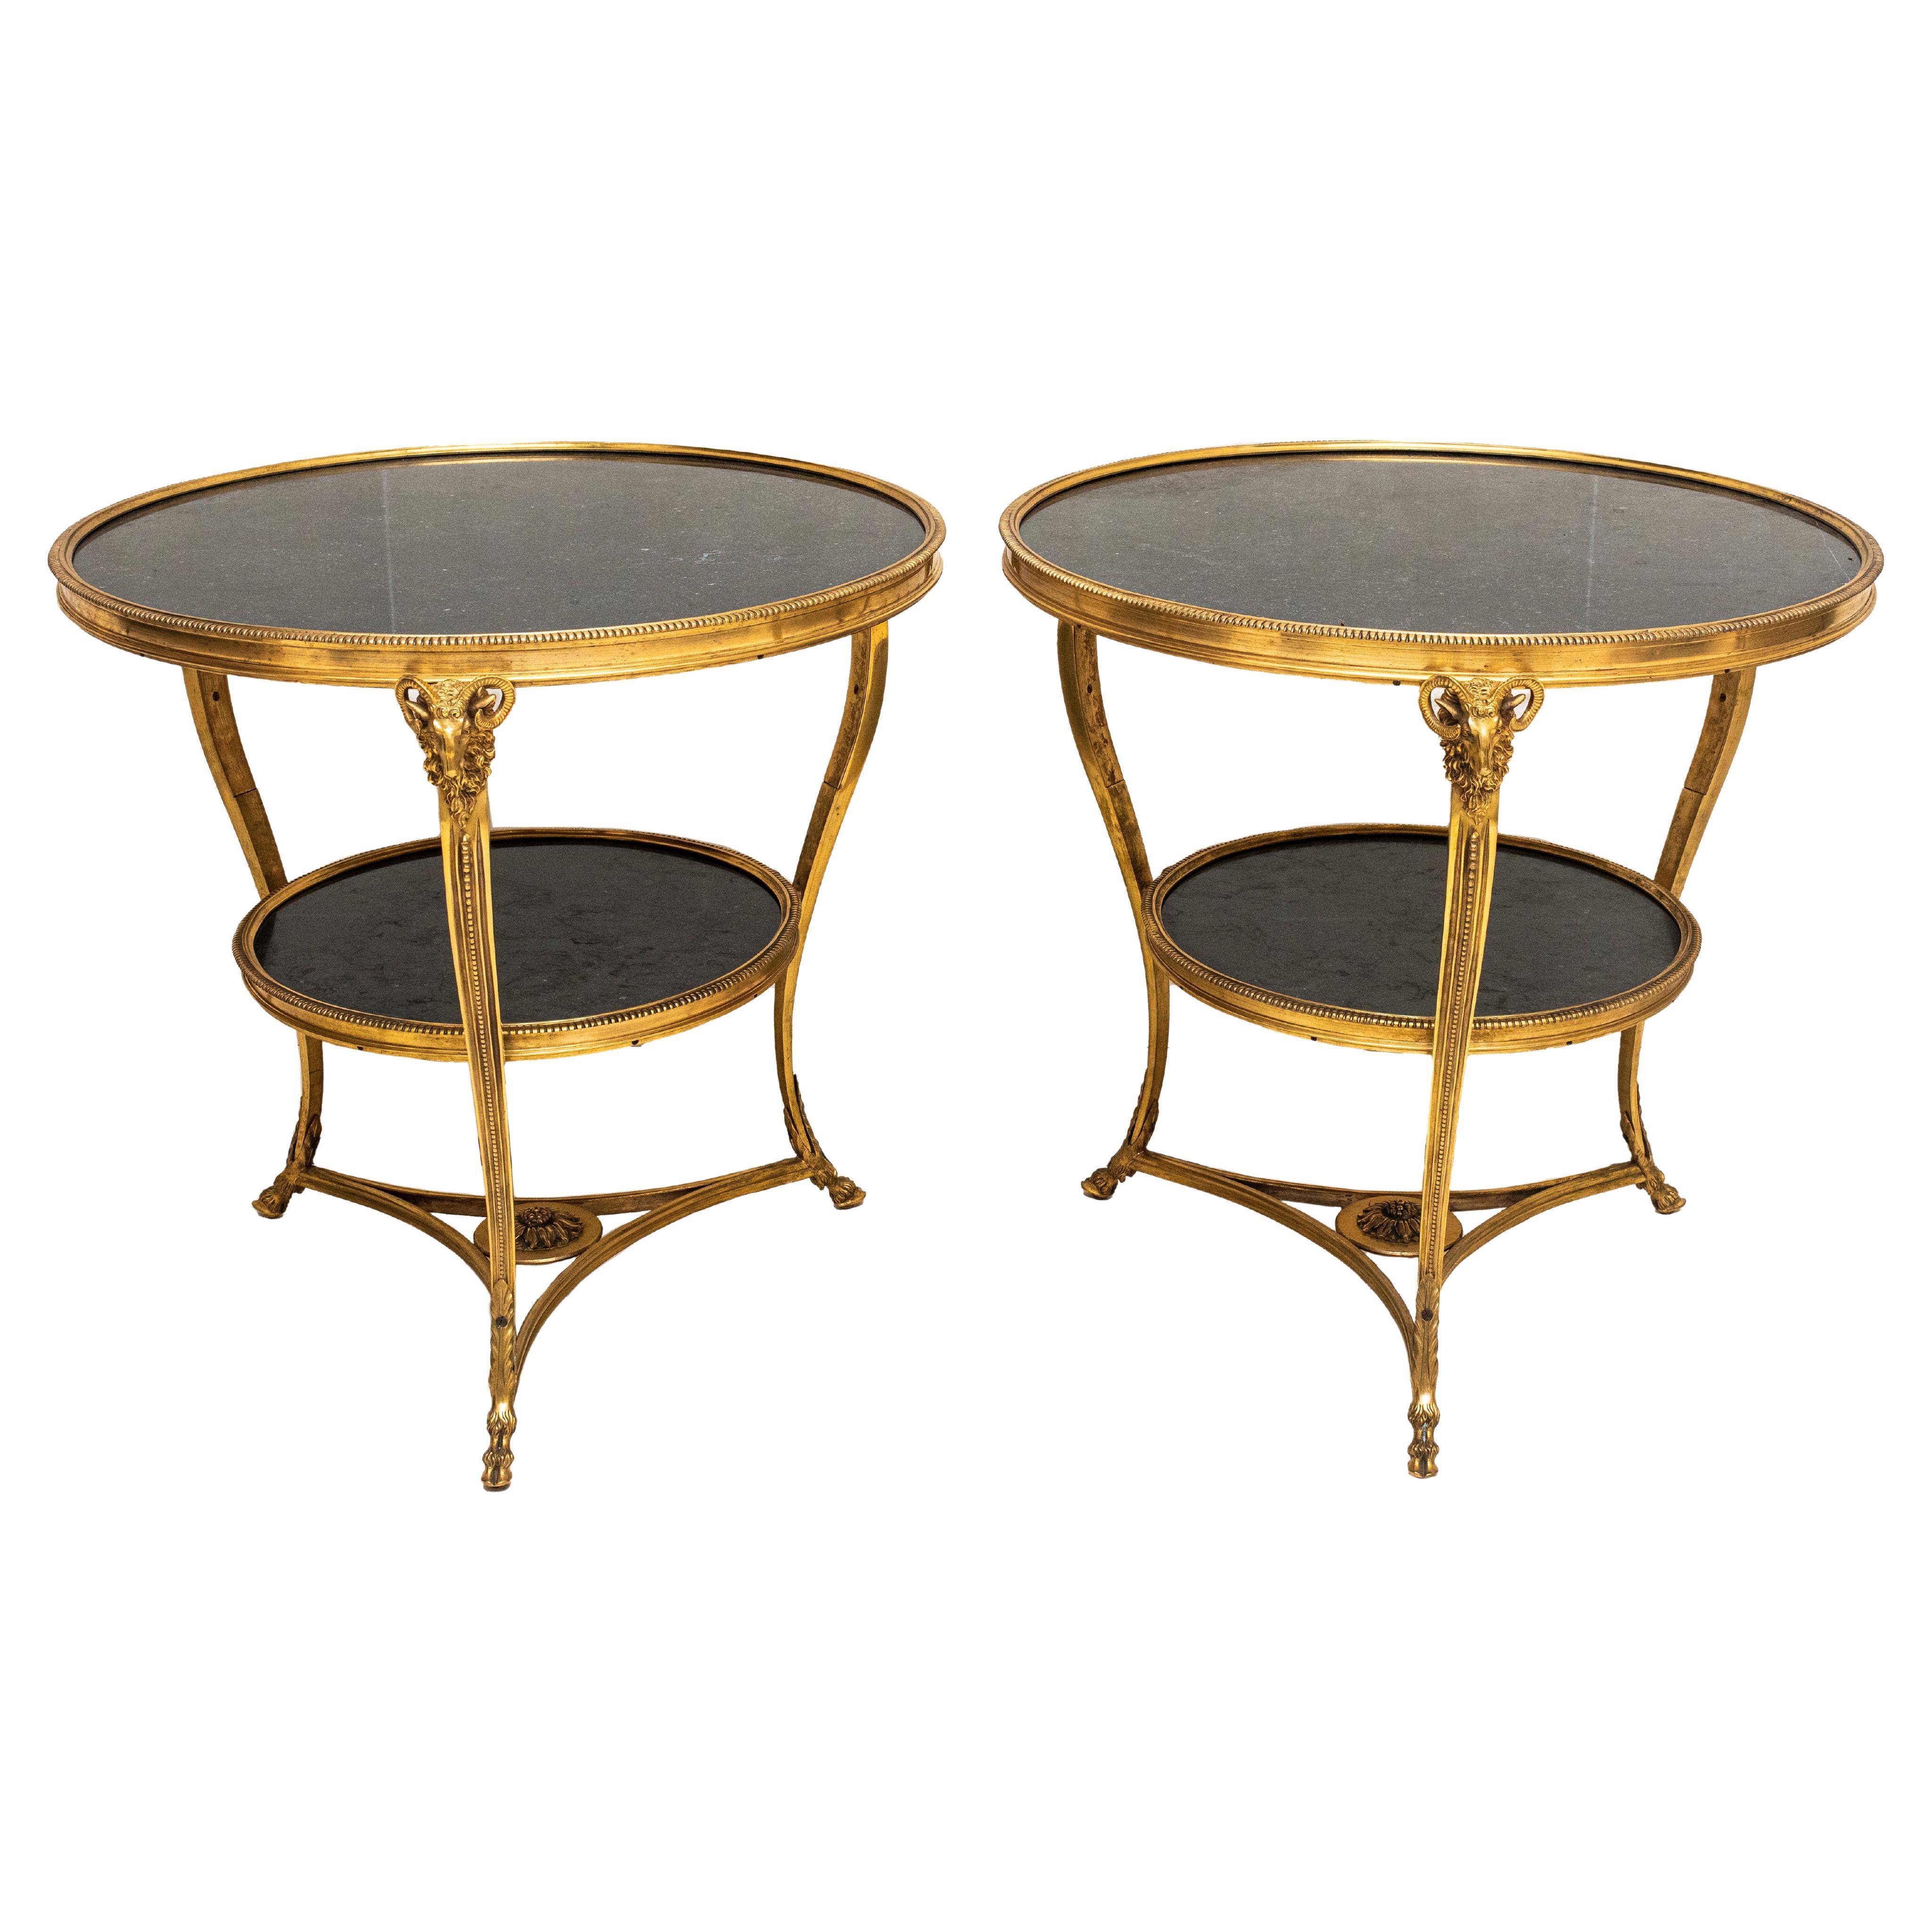 Pair of French Empire Style Gueridon Tables